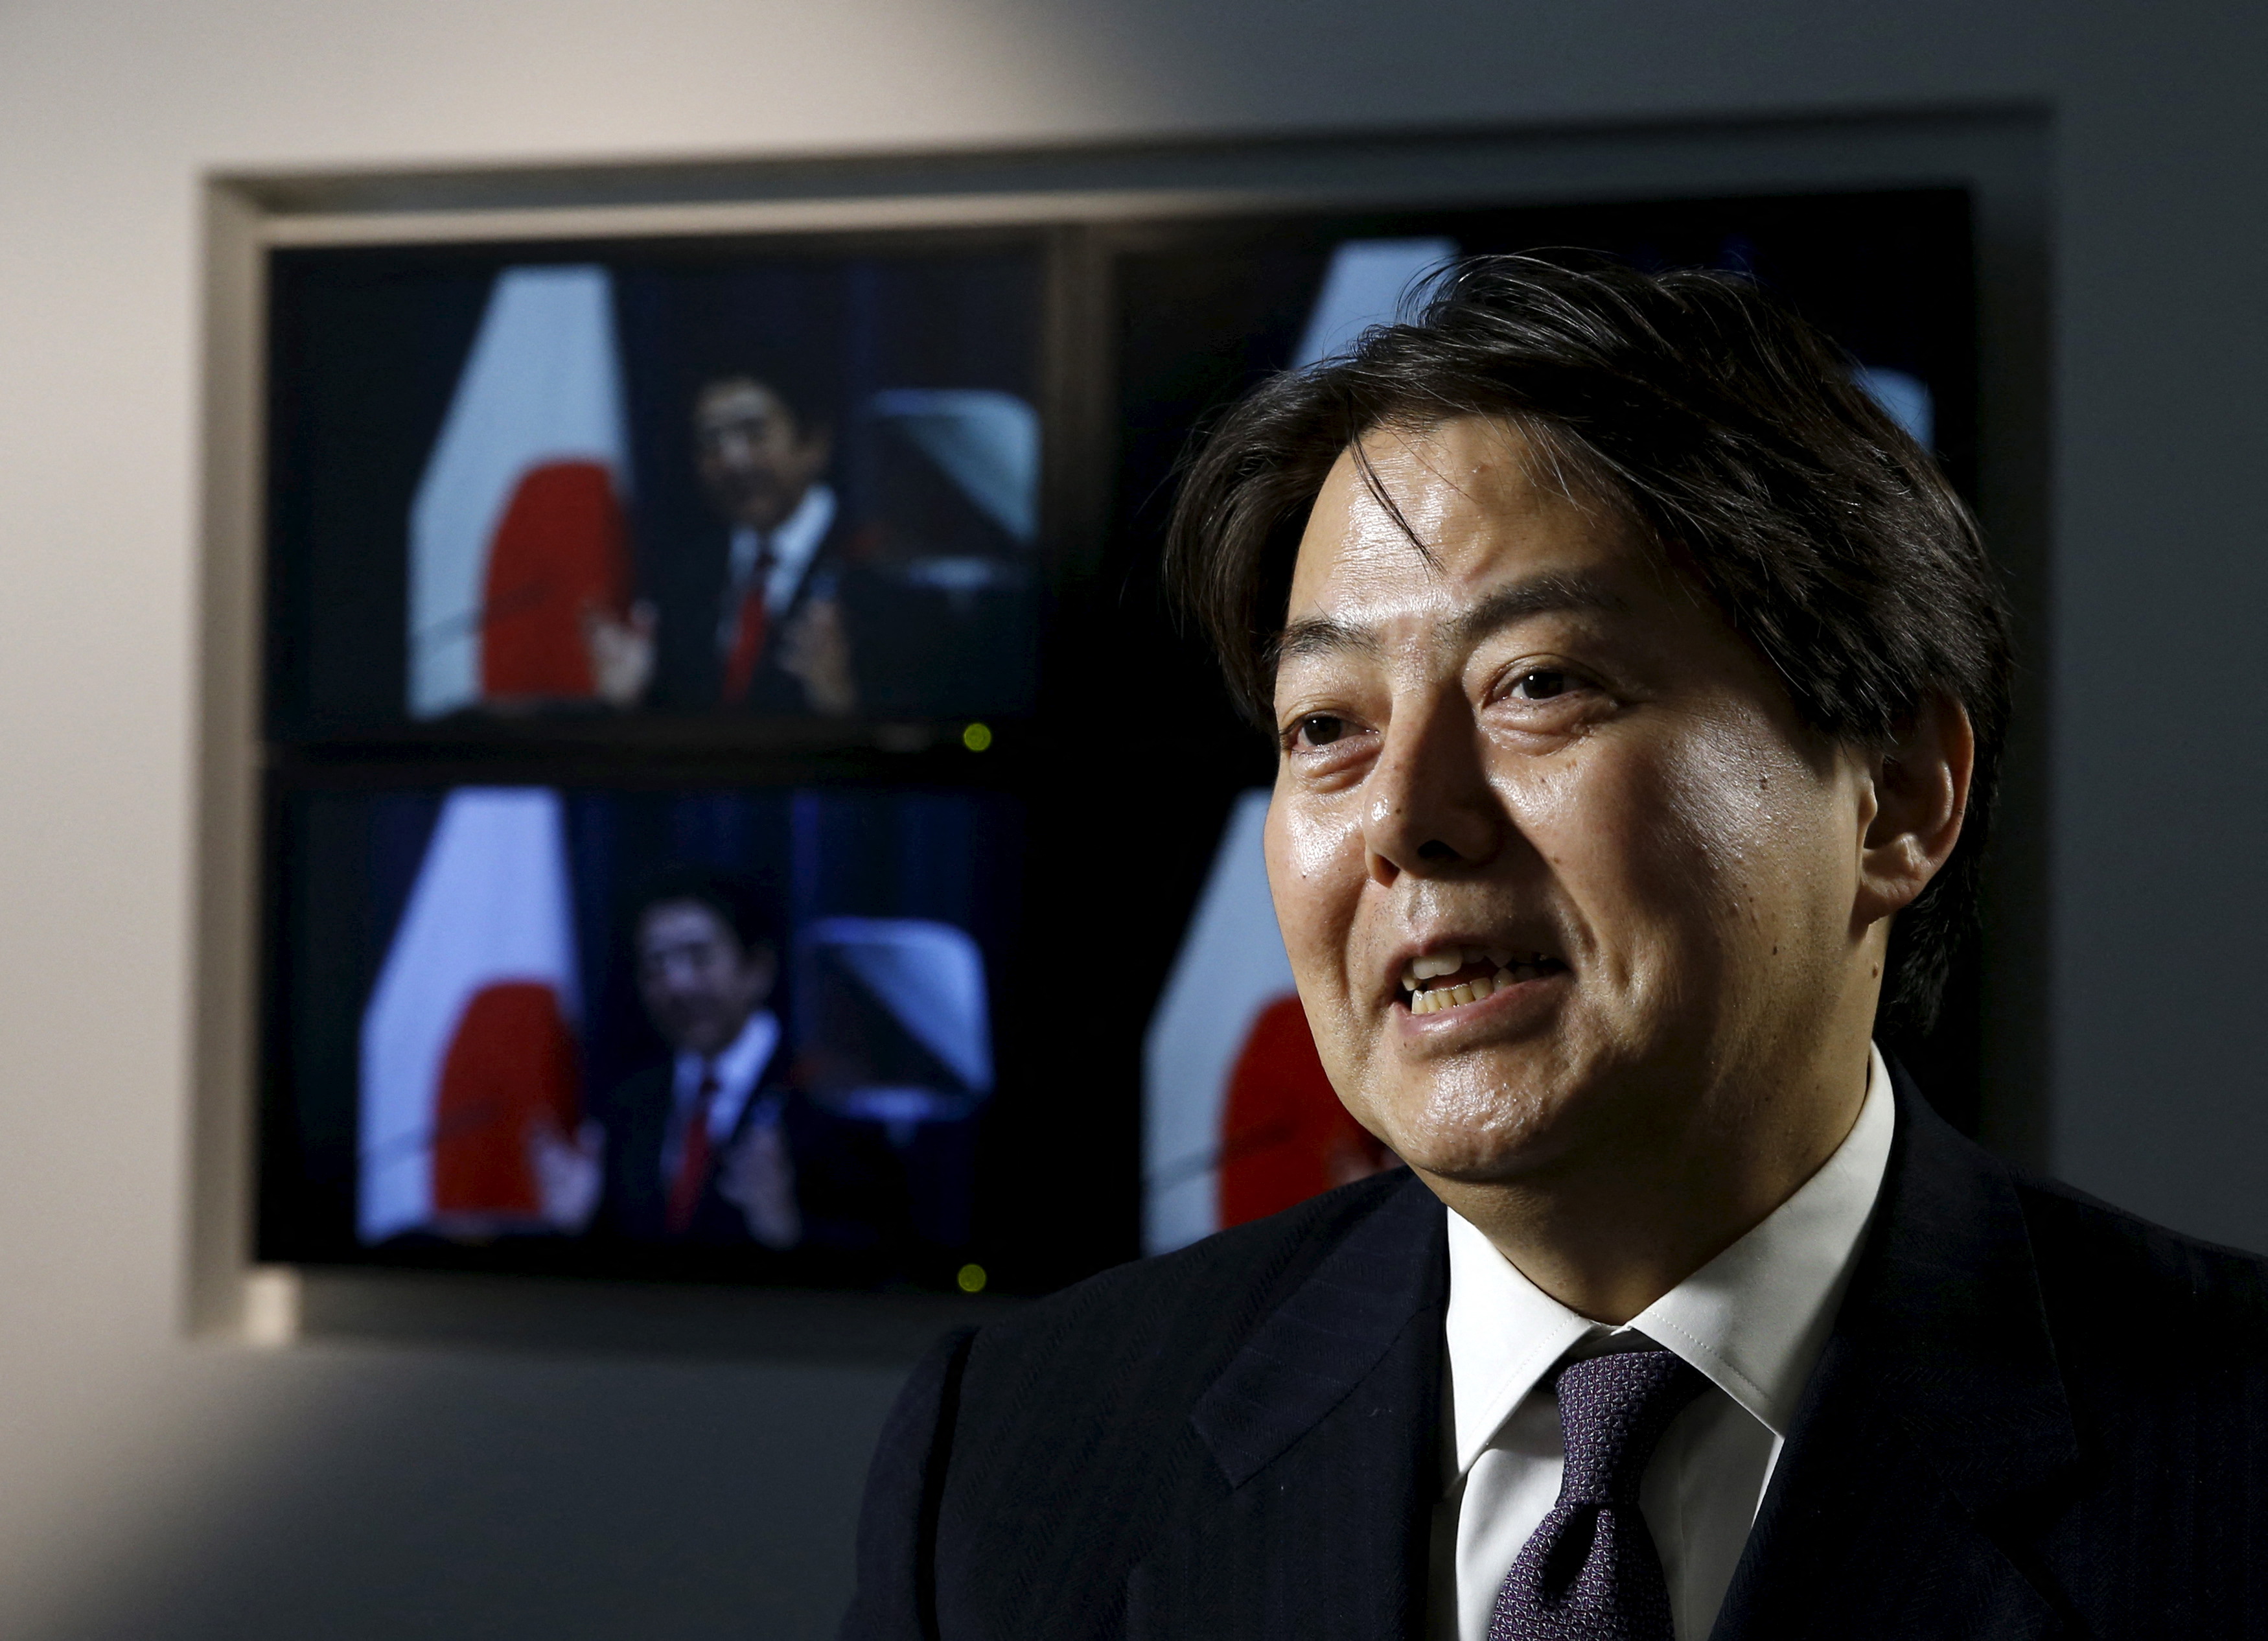 Liberal Democratic Party's Lawmaker and a former cabinet minister Hayashi speaks during an interview with Reuters during a Thomson Reuters Breakingviews event in Tokyo